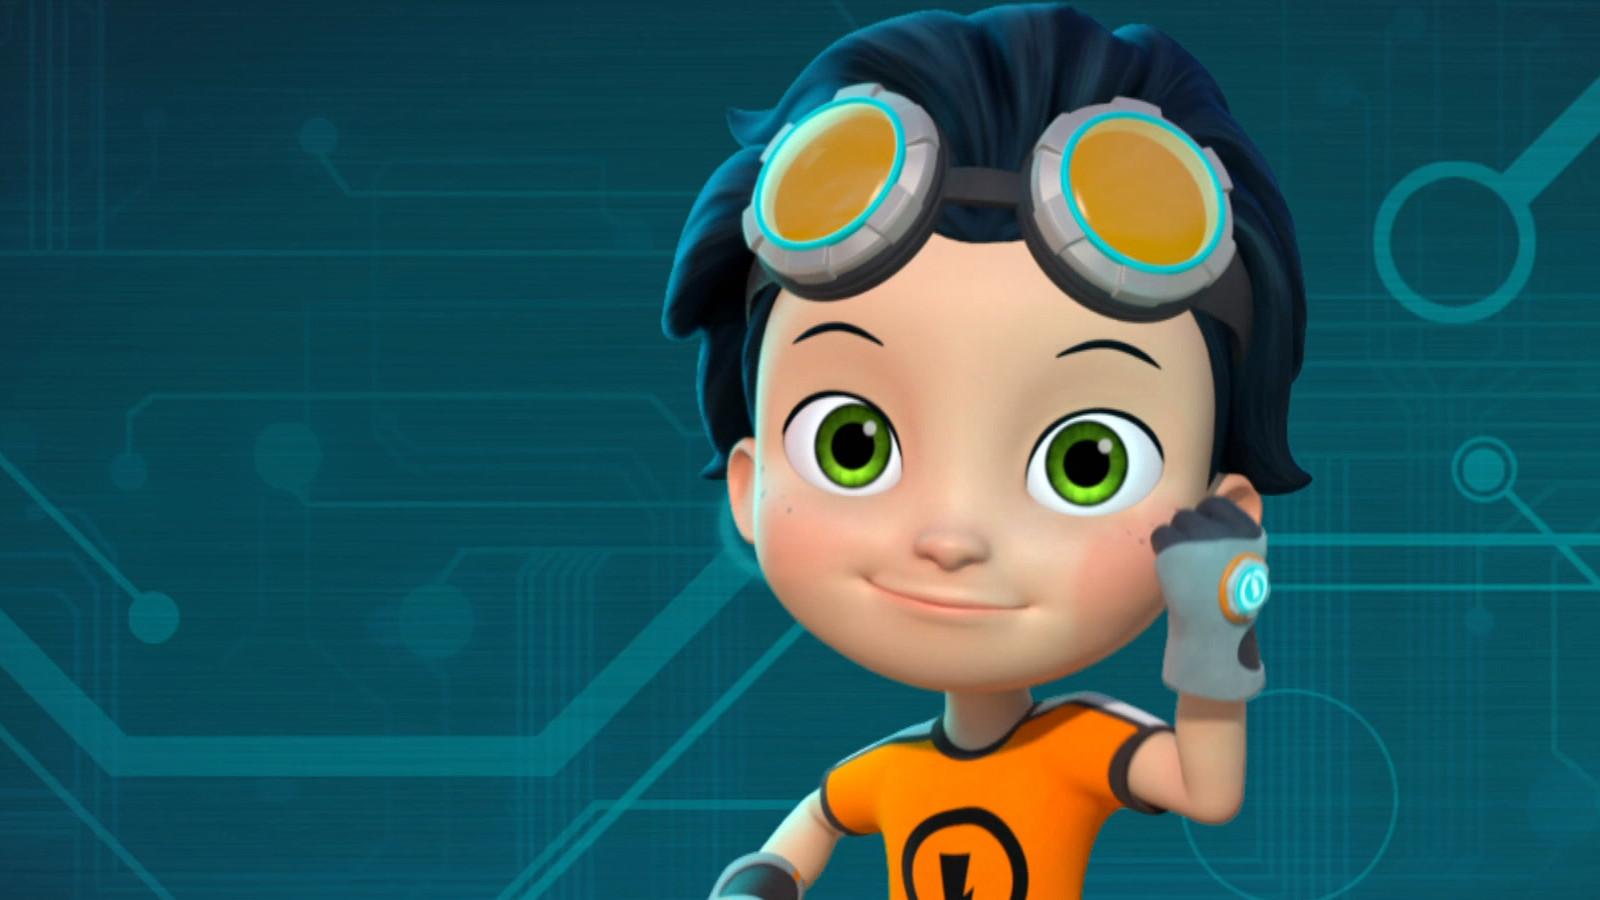 Rusty Rivets Wallpapers - Top Free Rusty Rivets Backgrounds ...